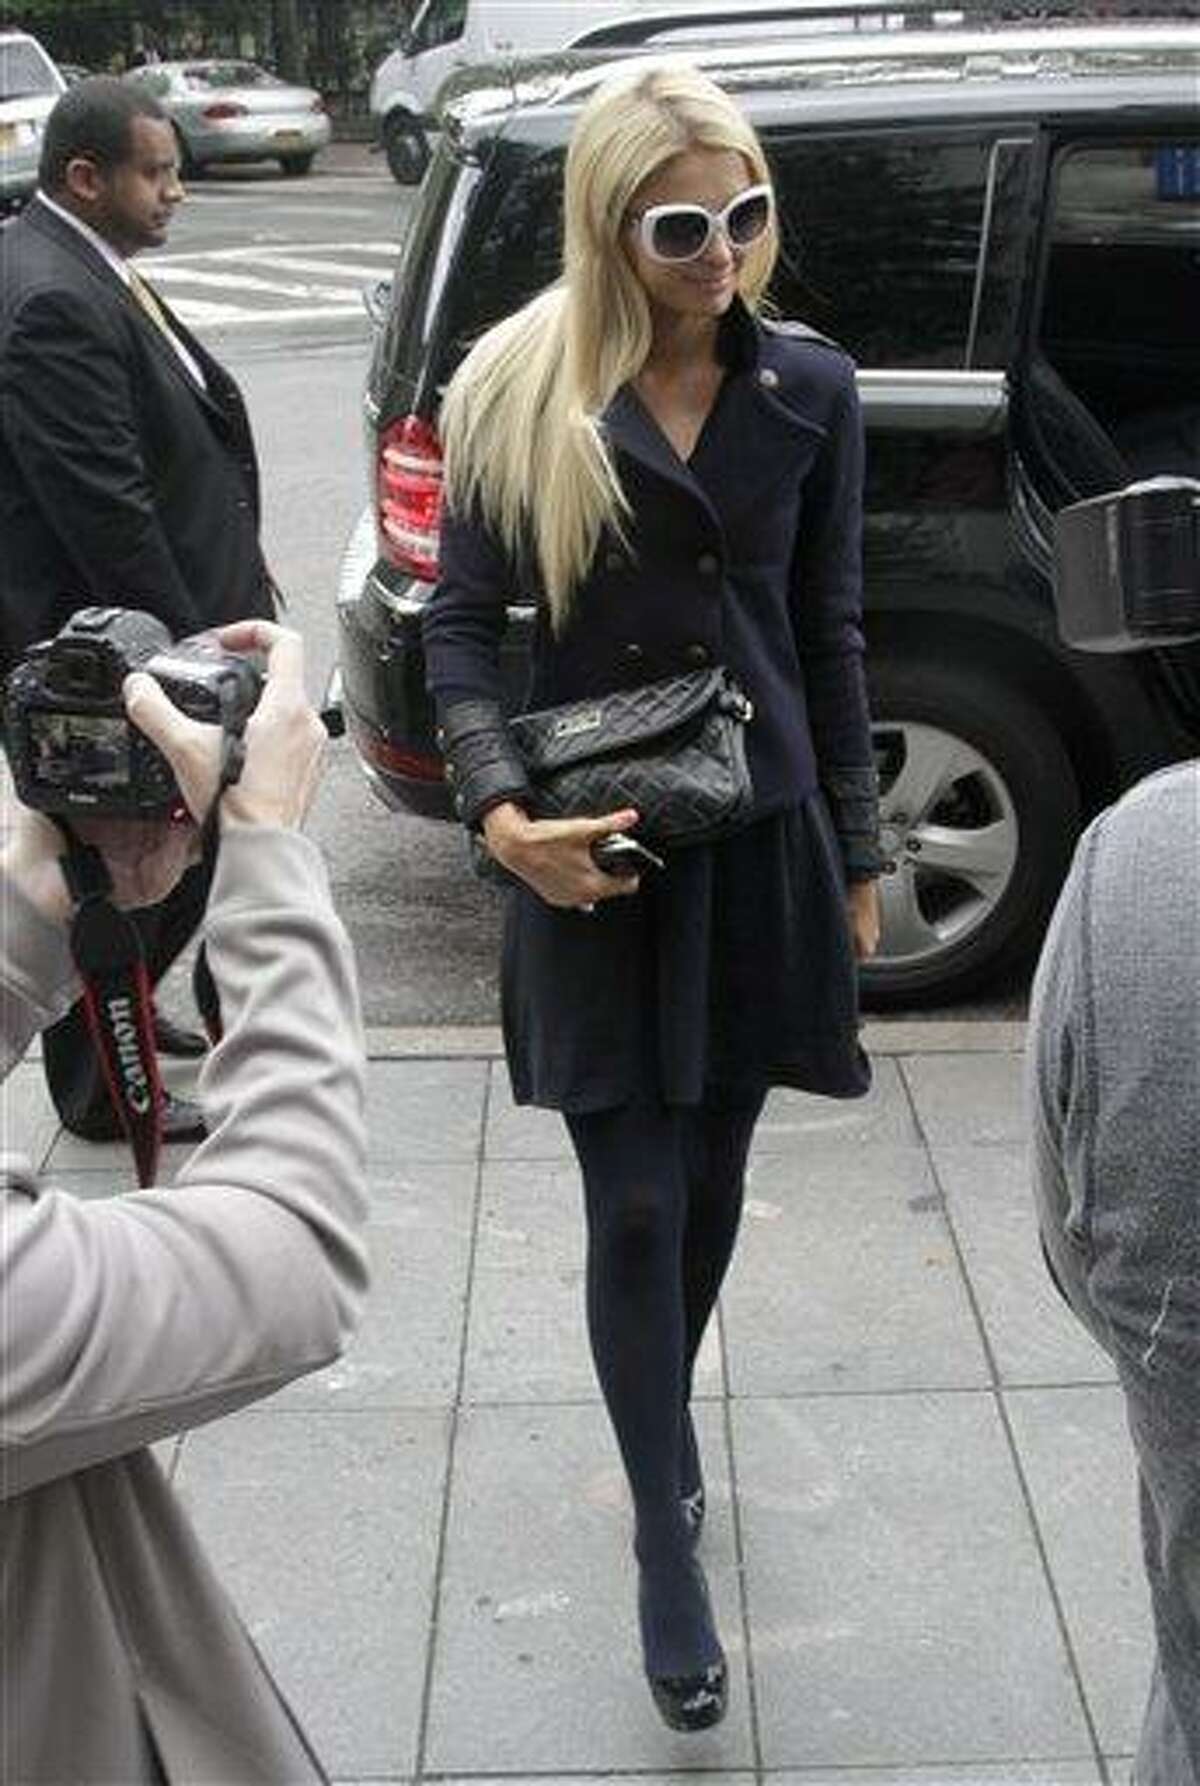 Paris Hilton arrives at federal court in lower Manhattan on Monday, June 4, 2012, in New York. Hilton was in court for settlement talks with an Italian designer that sued her over a licencing agreement to market lingerie under her name. The suit, for unspecified damages, alleges Hilton hurt business by not approving design concepts in a timely manner.